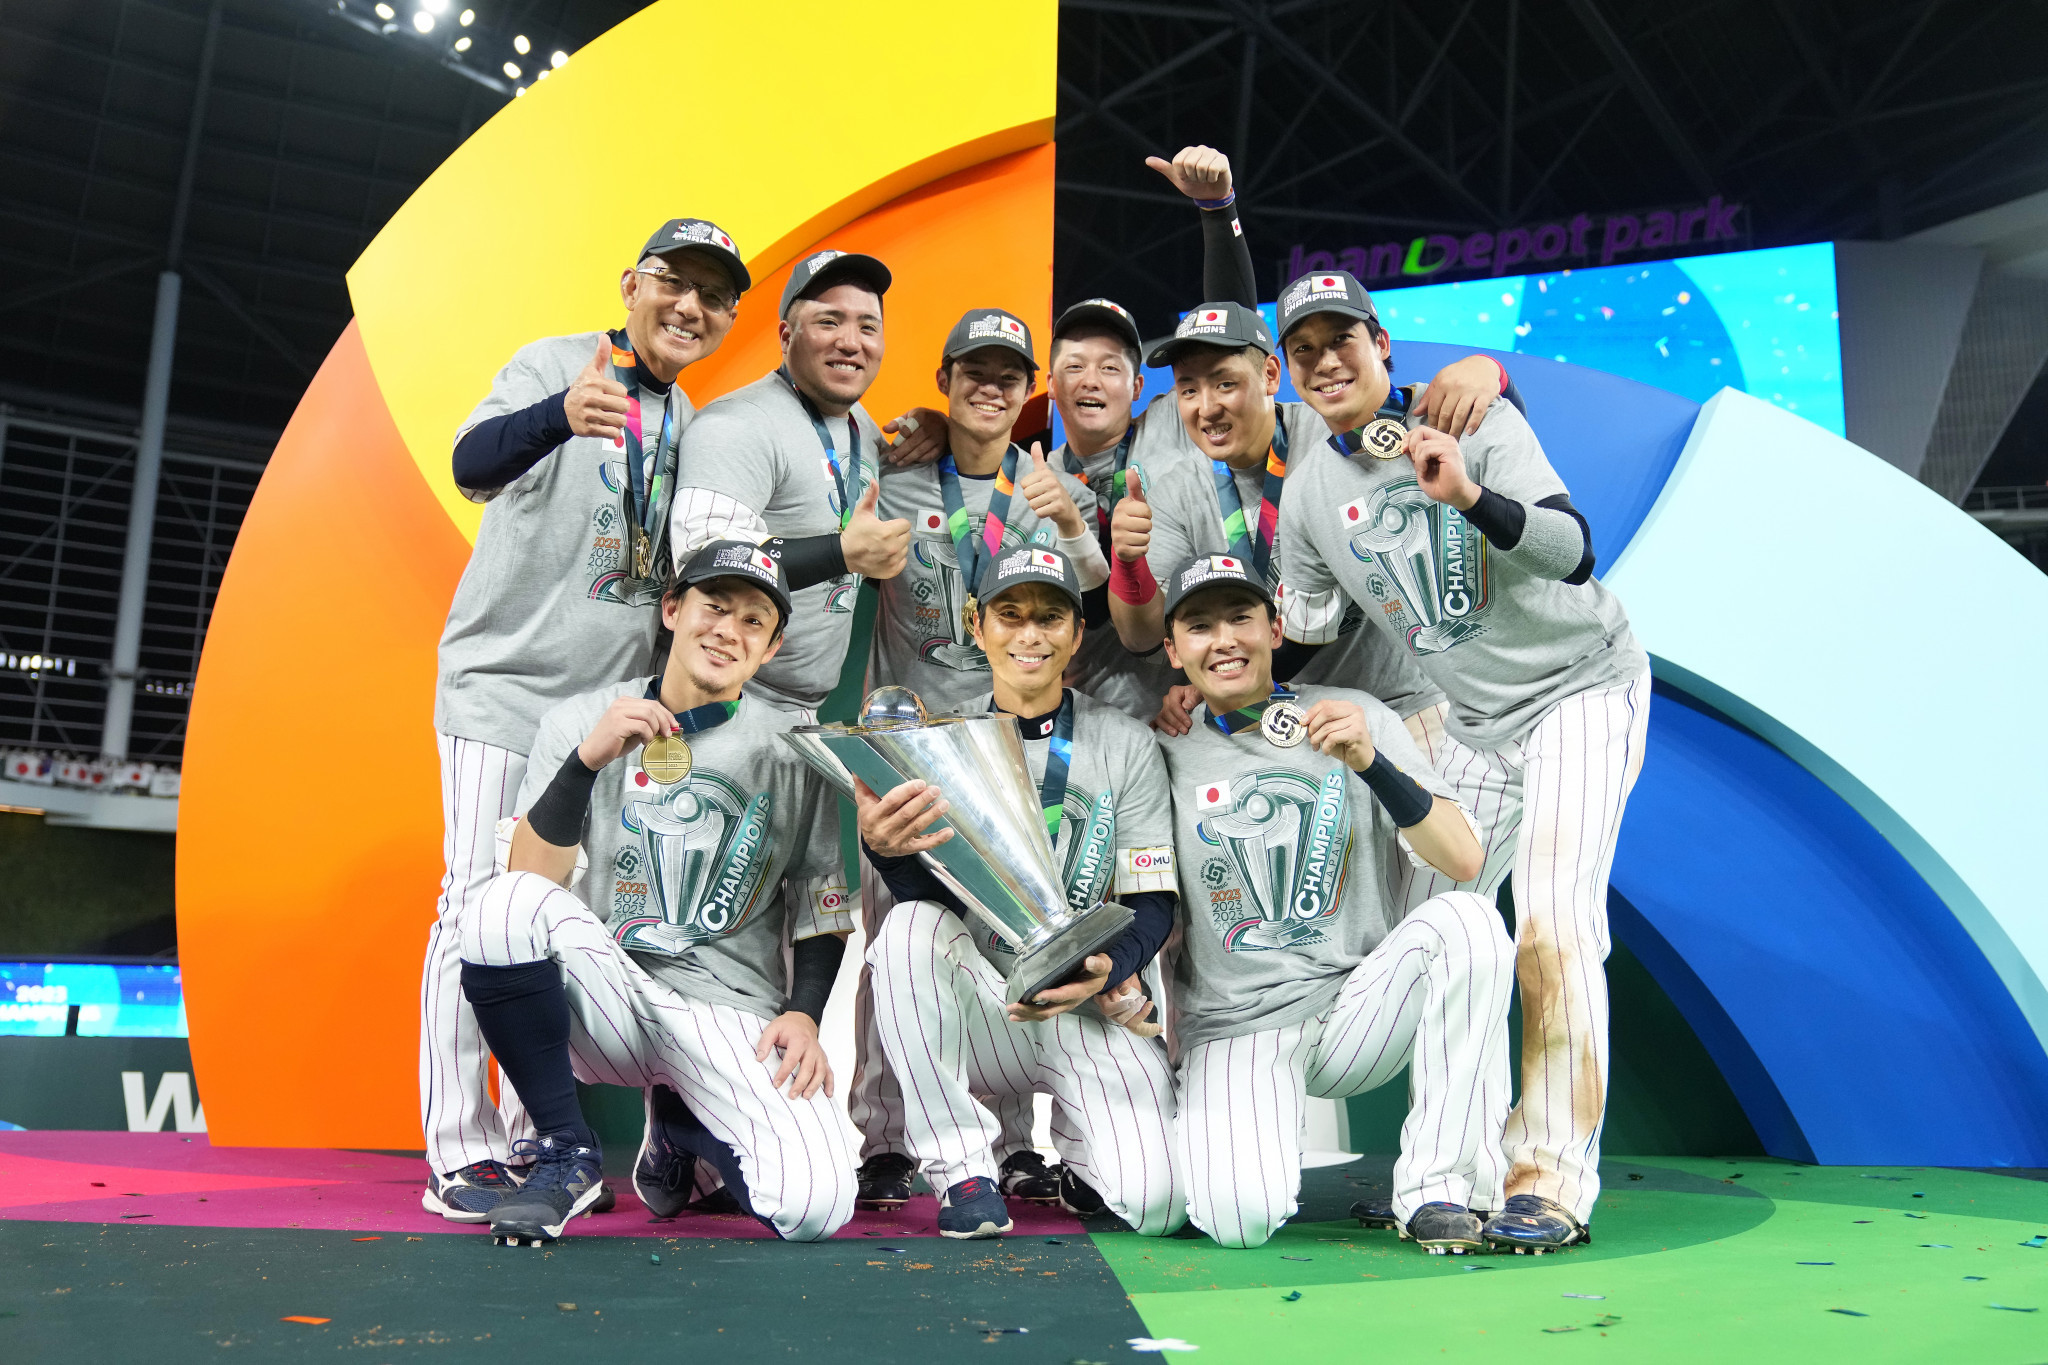 Japan took home their third World Baseball Classic title with a victory over the United States ©Getty Images